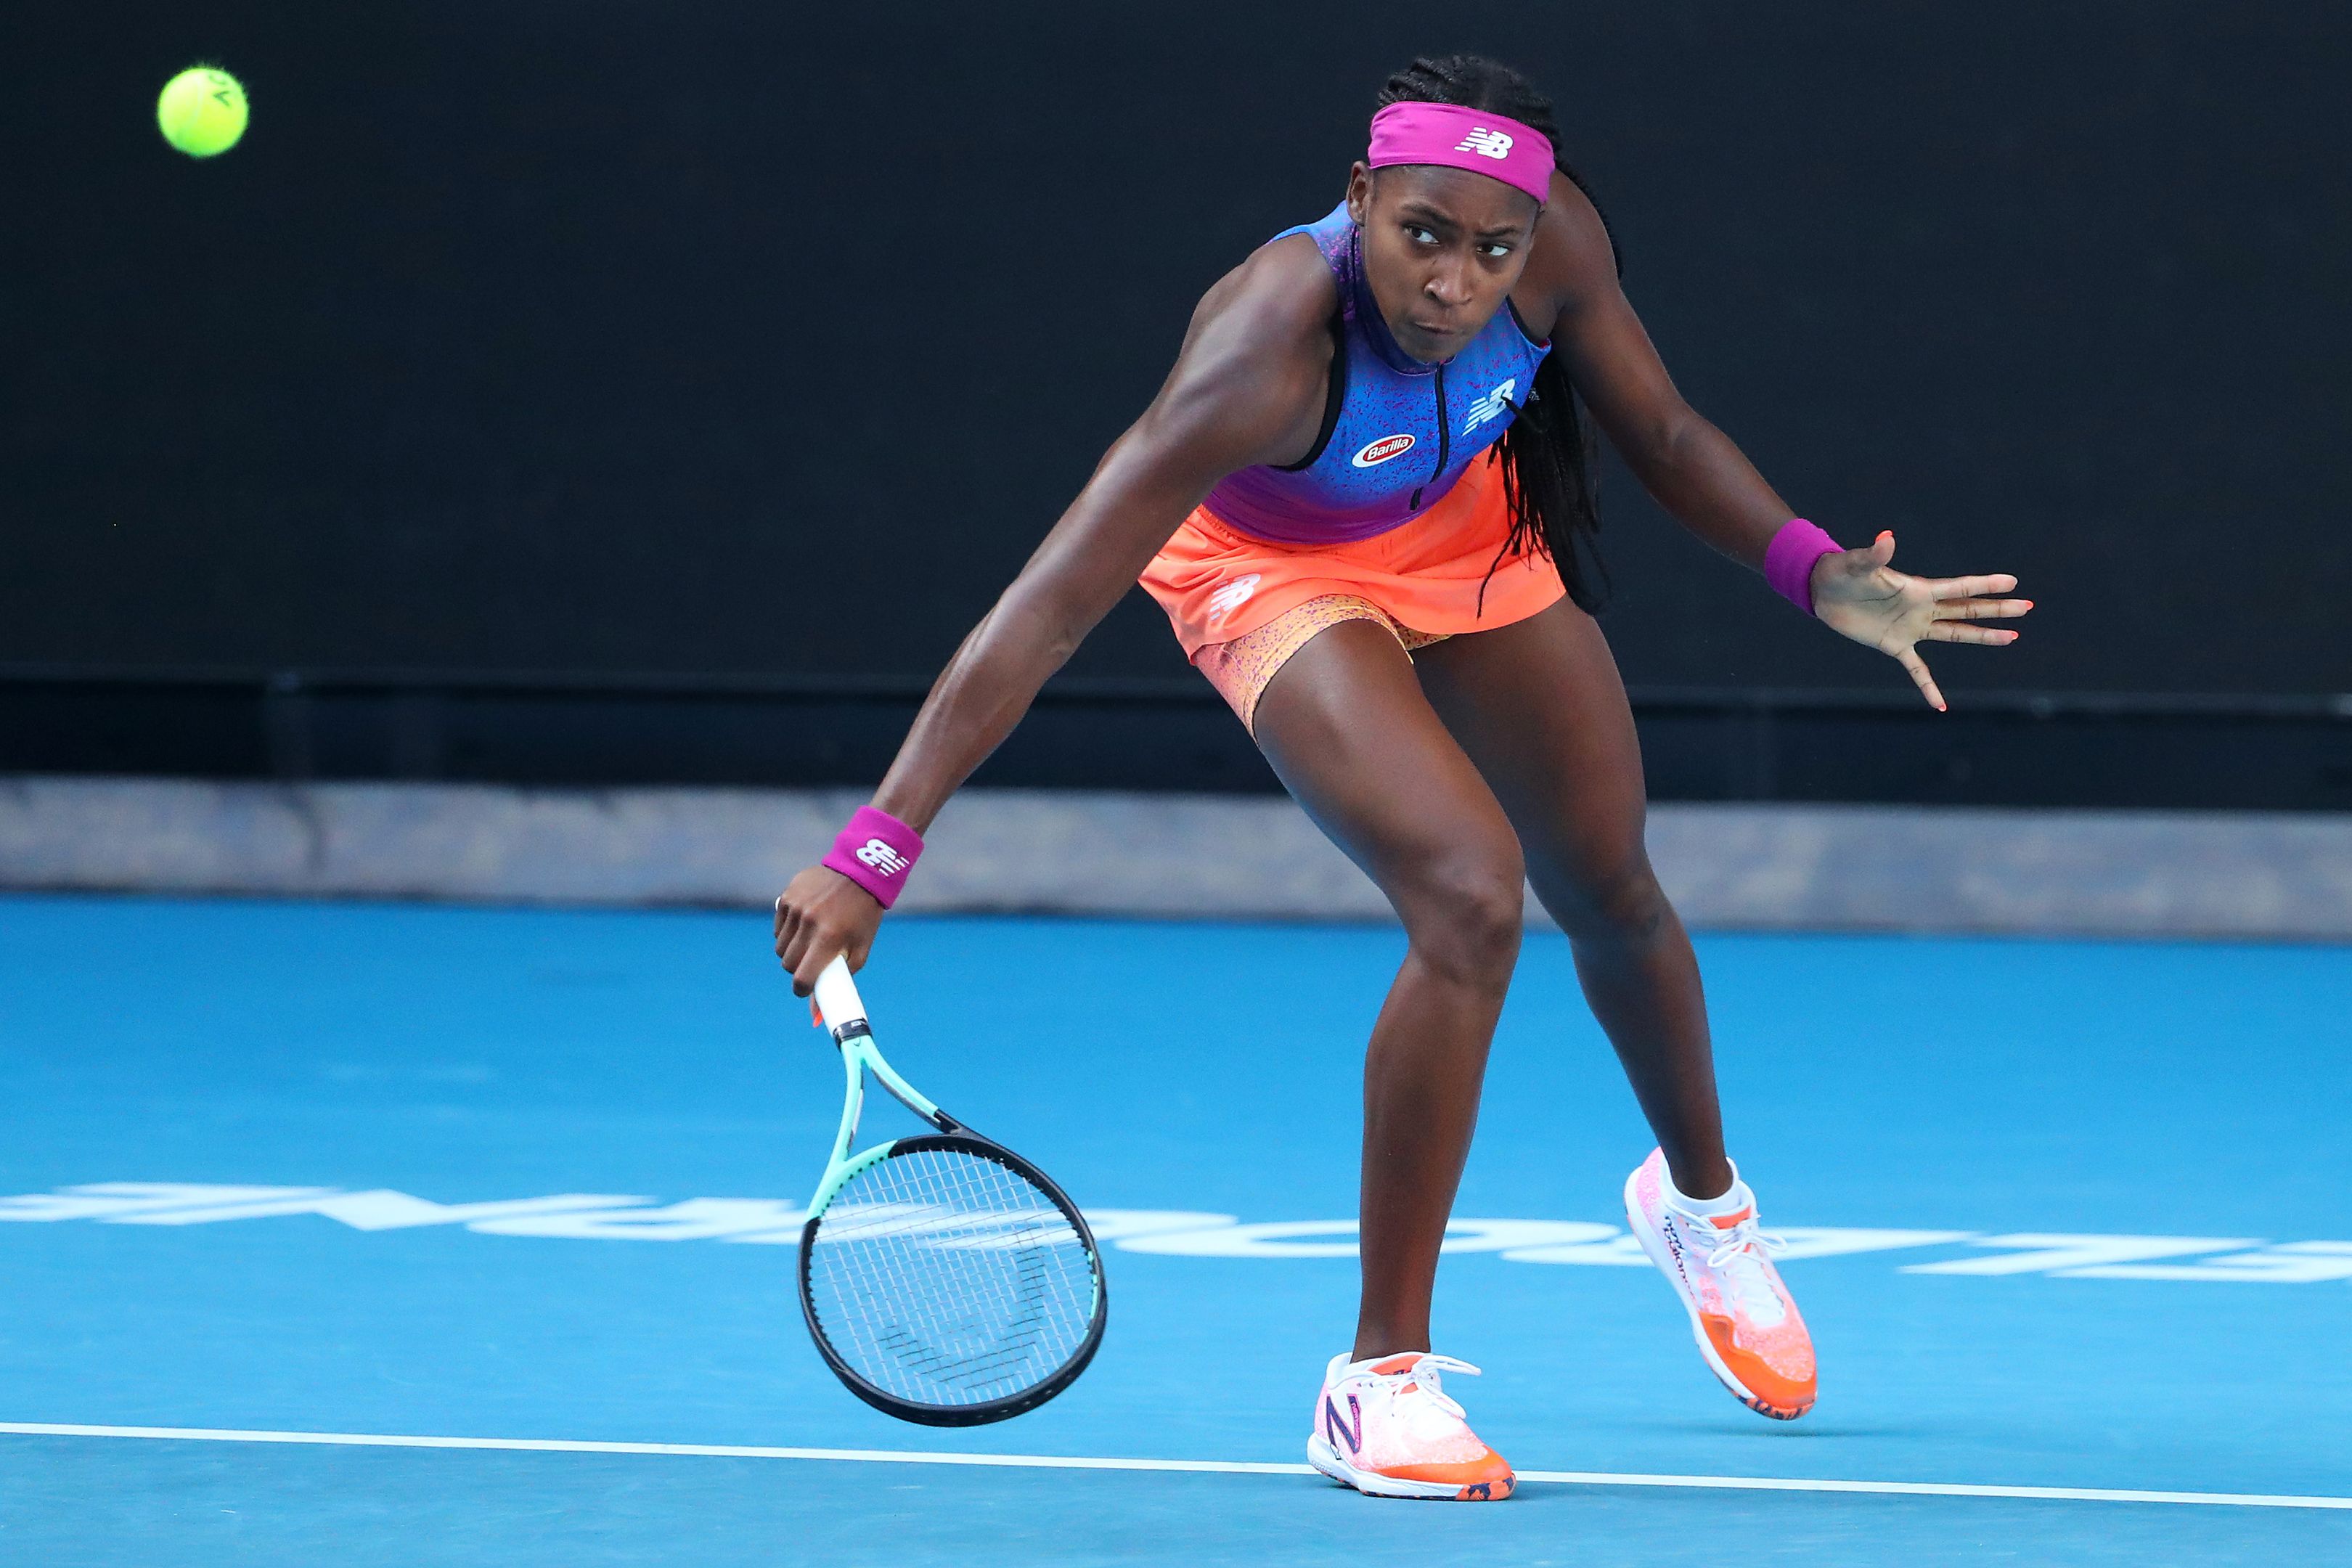 Coco Gauff sent packing in dismal Australian Open performance